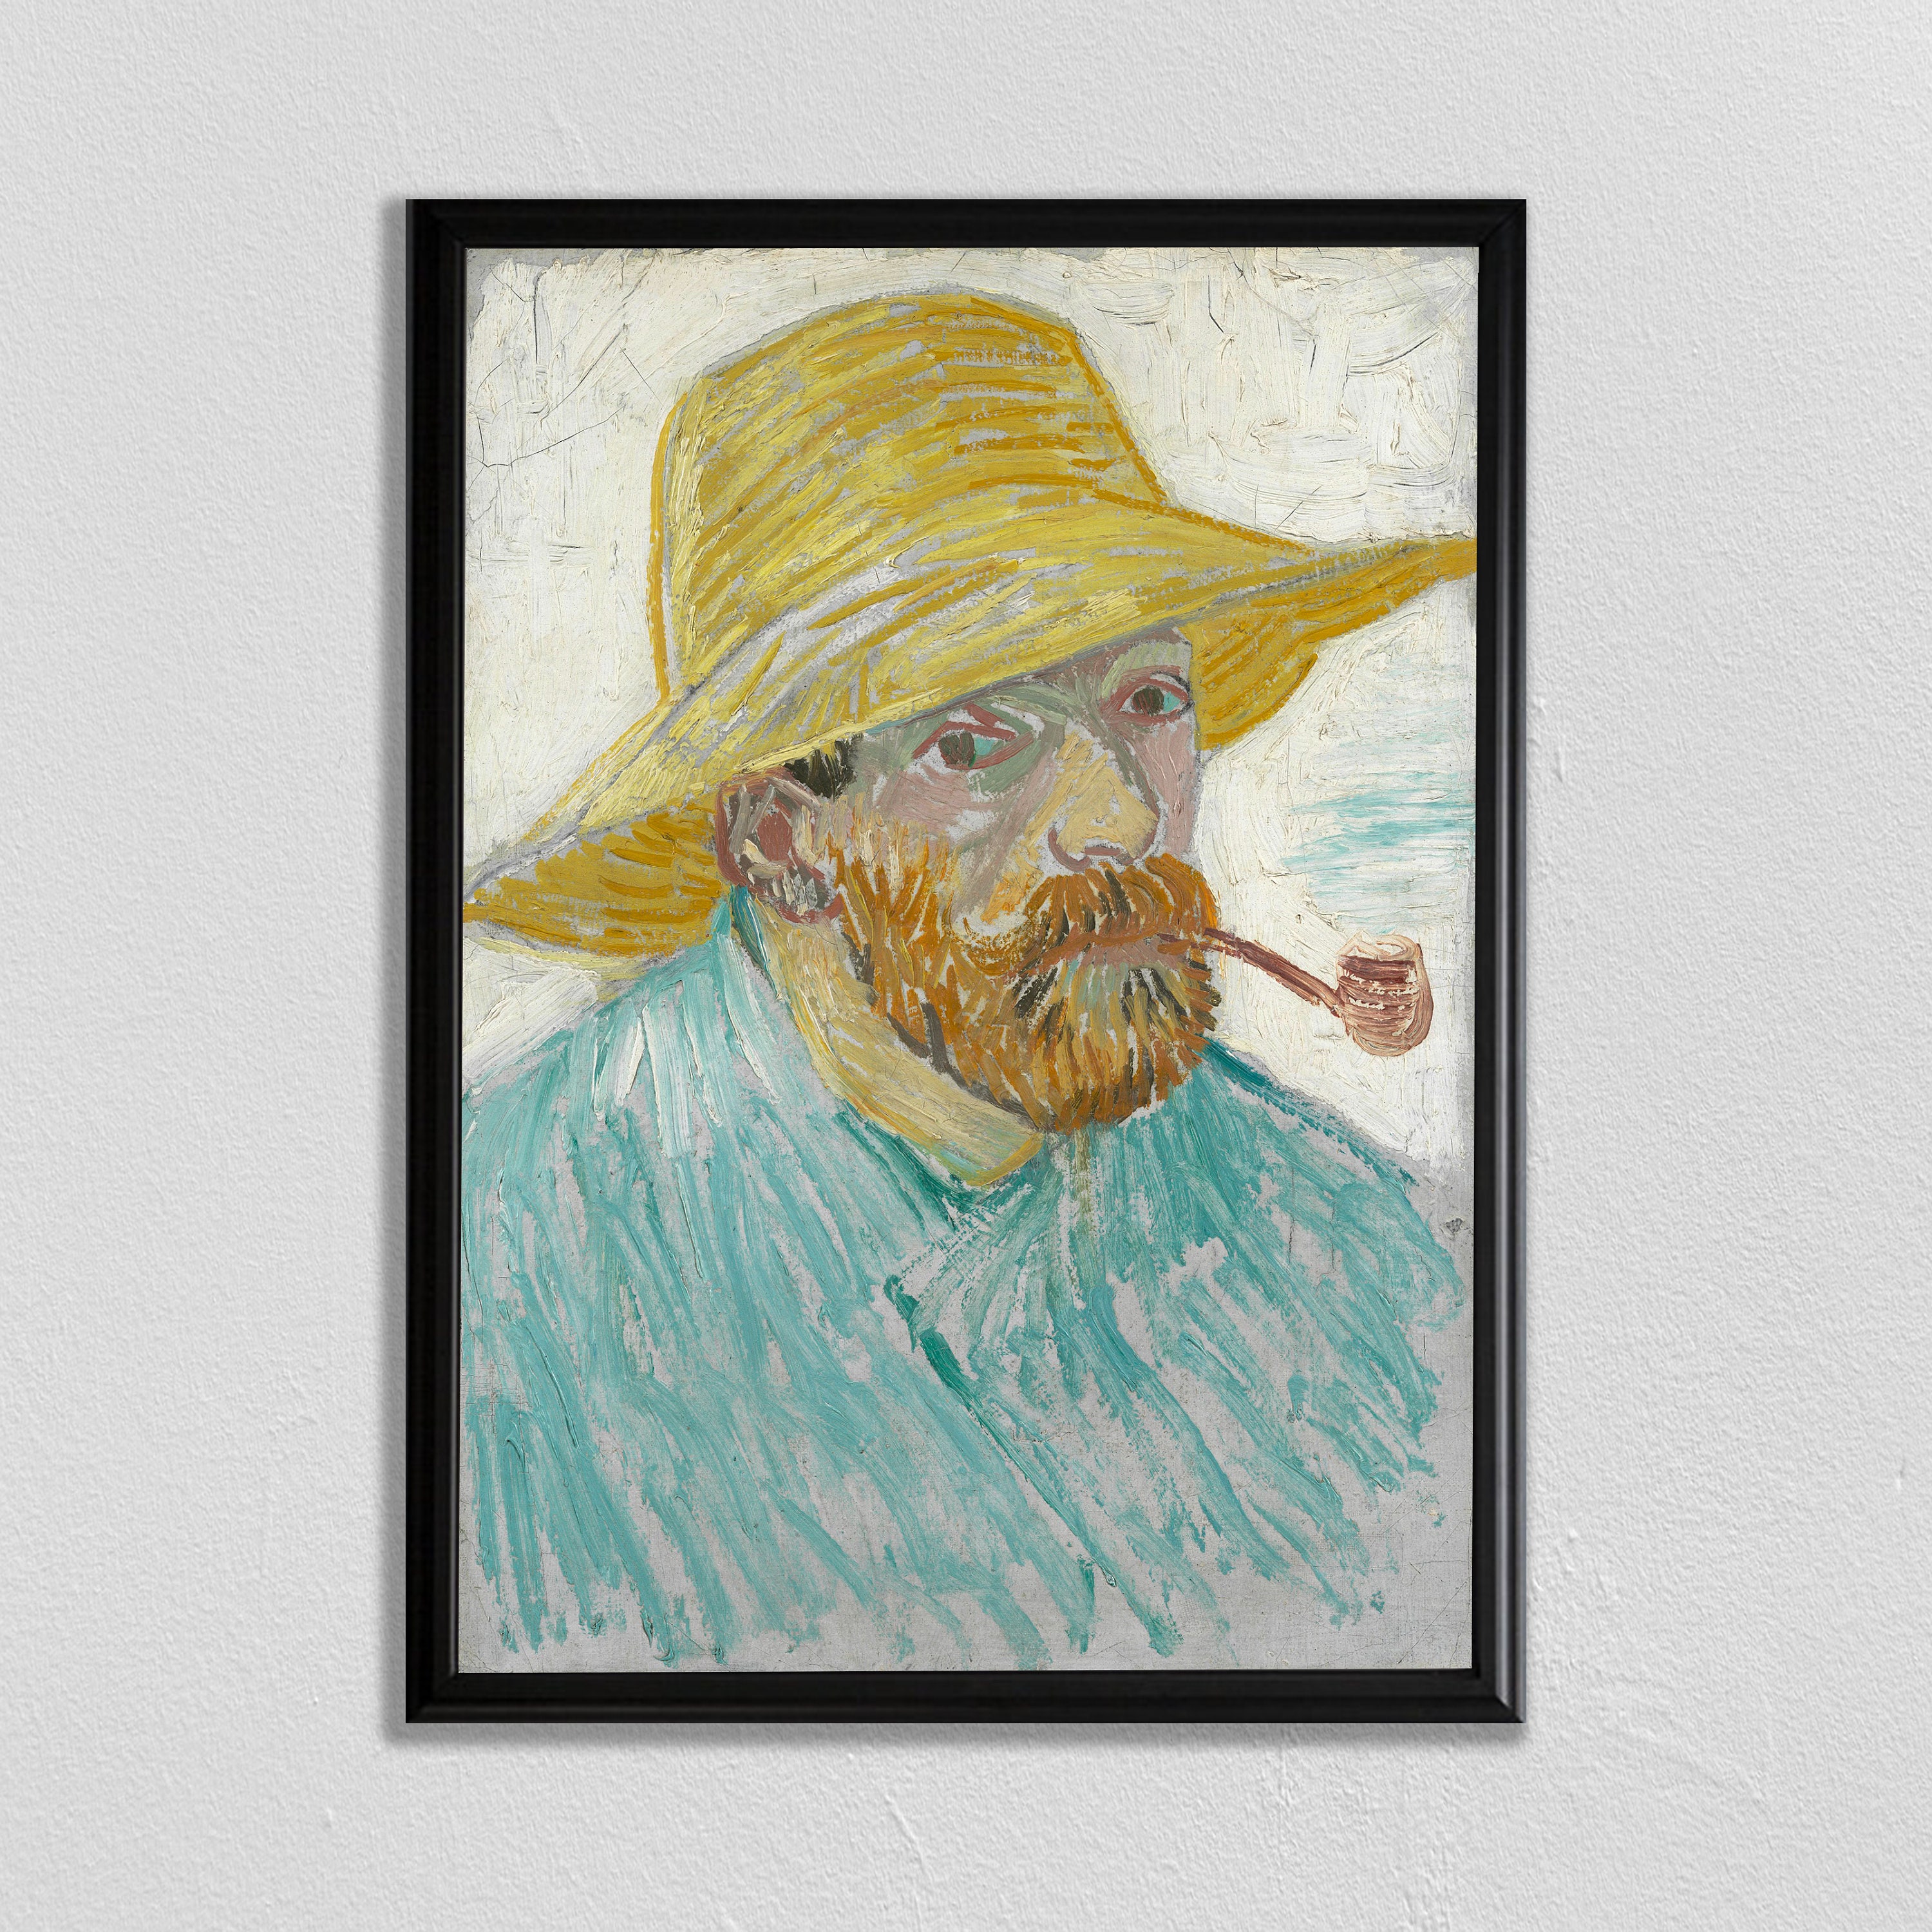 Self-portrait With and Straw Hat Van Gogh Self Portrait | Etsy